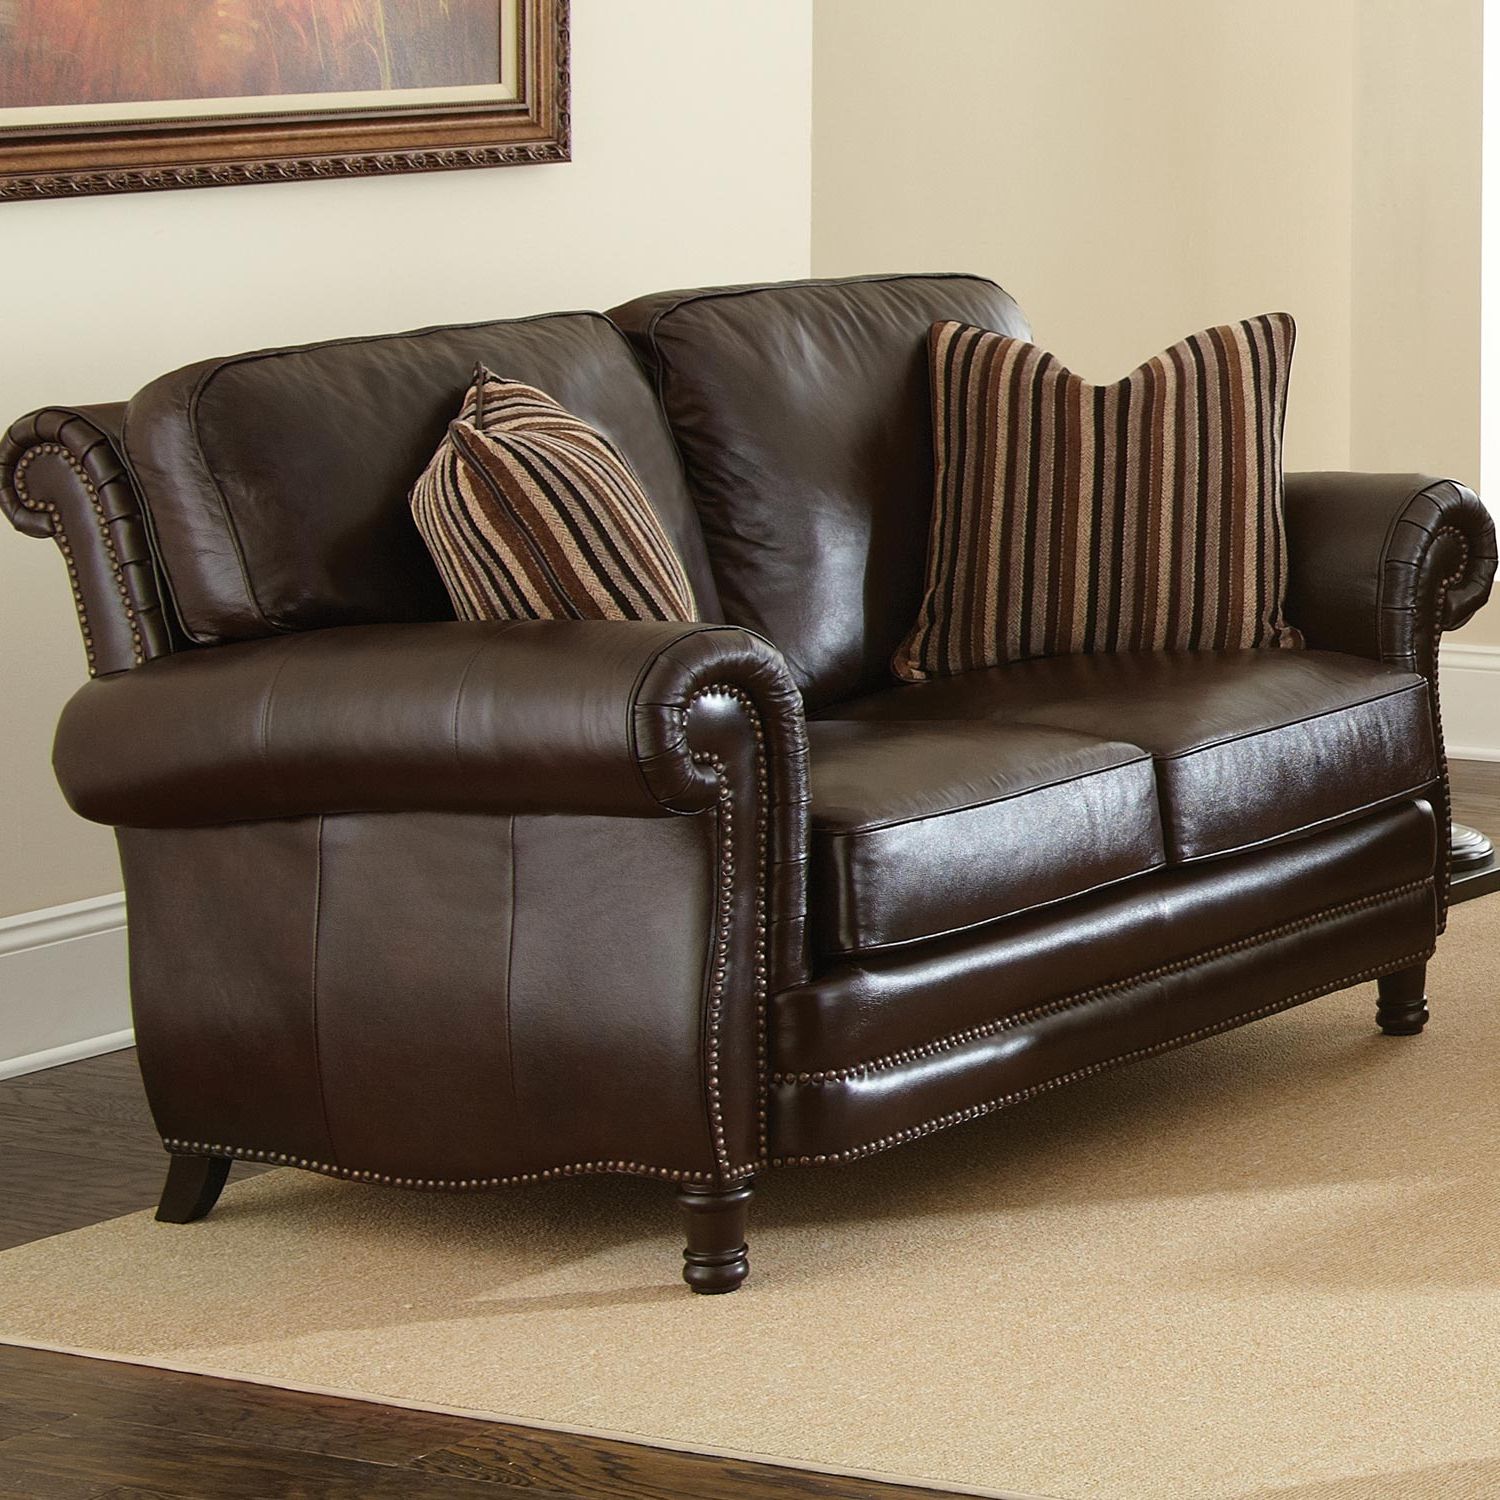 Chateau 3 Piece Leather Sofa Set – Antique Chocolate Brown (Photo 1 of 15)